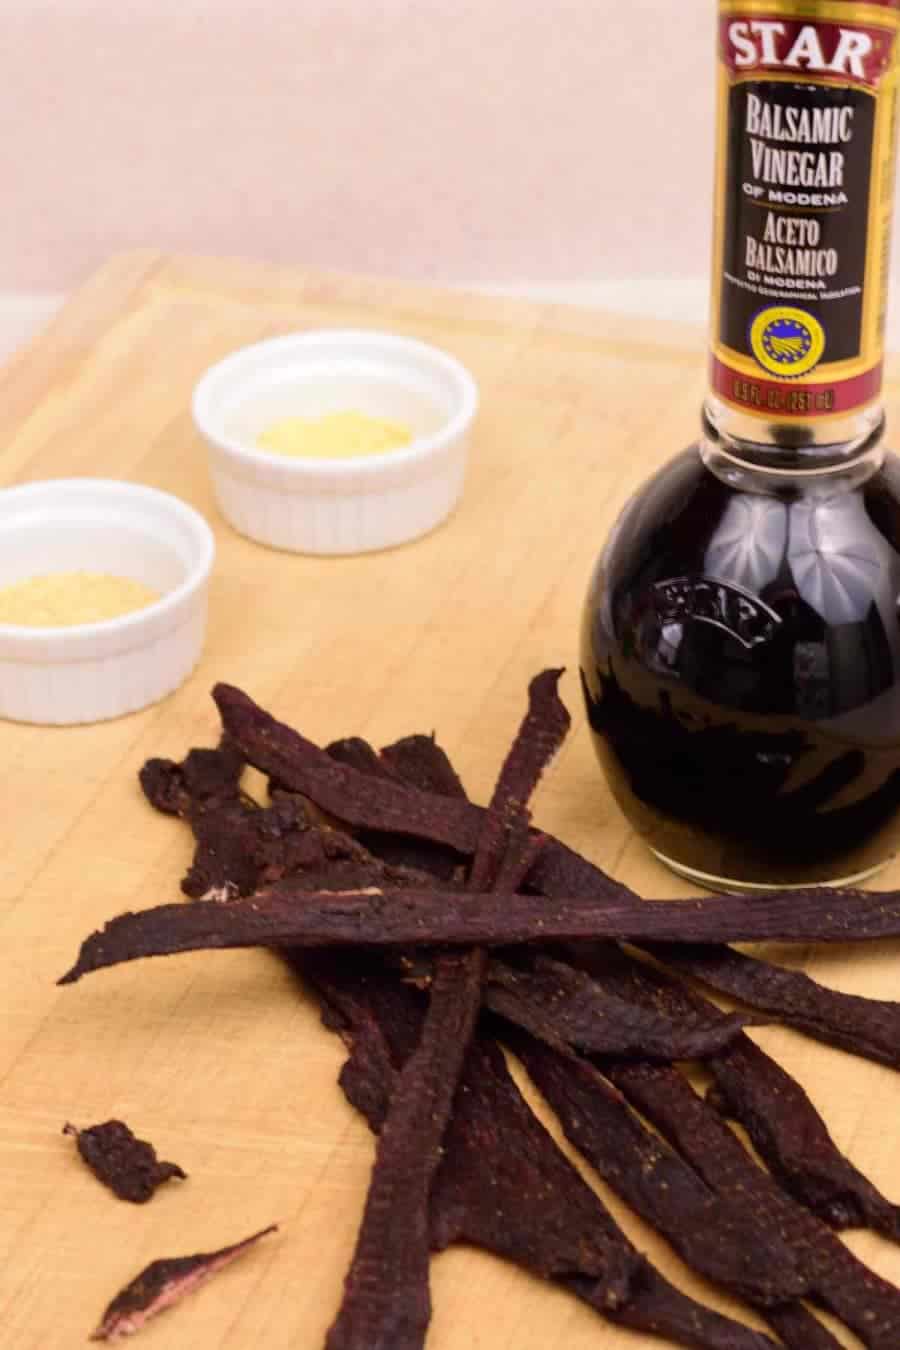 If you like balsamic vinegar, this is the jerky recipe for you. I love the flavor that the vinegar brings out in this venison jerky. Give it a try! | Jerkyholic.com